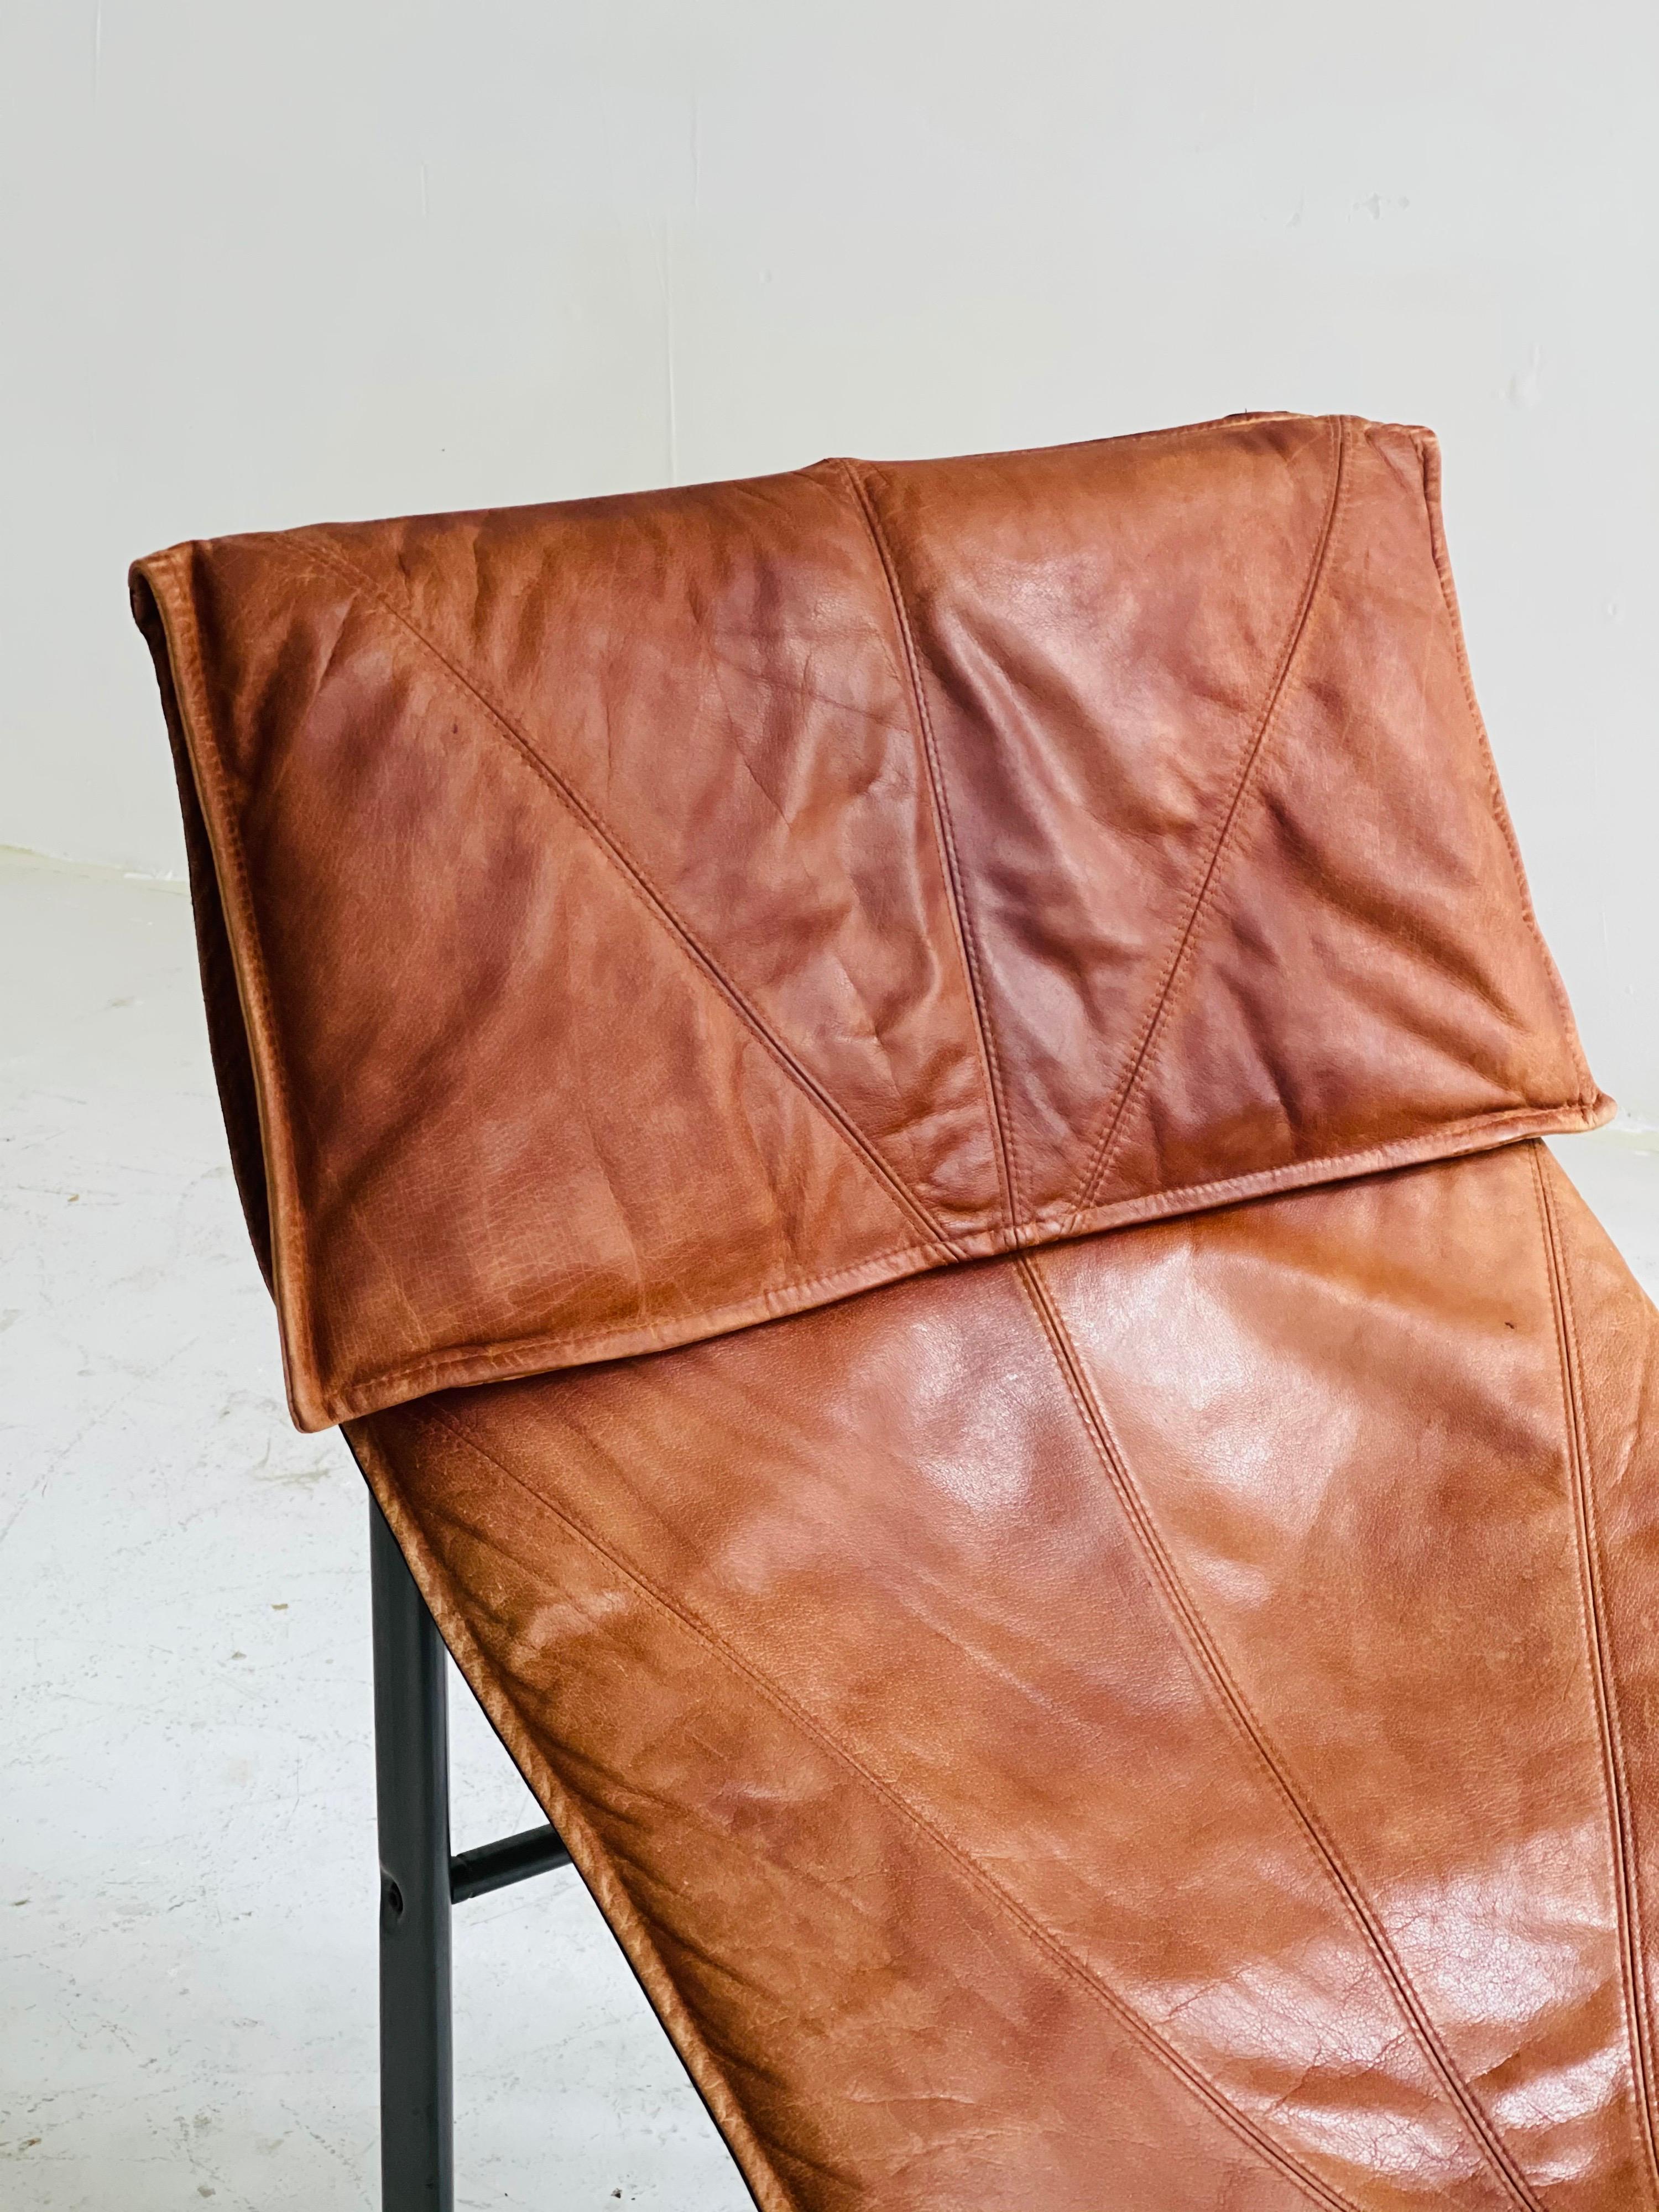 Patinated Cognac Leather Chaise Longue by Tord Bjorklund, Sweden, 1970 For Sale 3